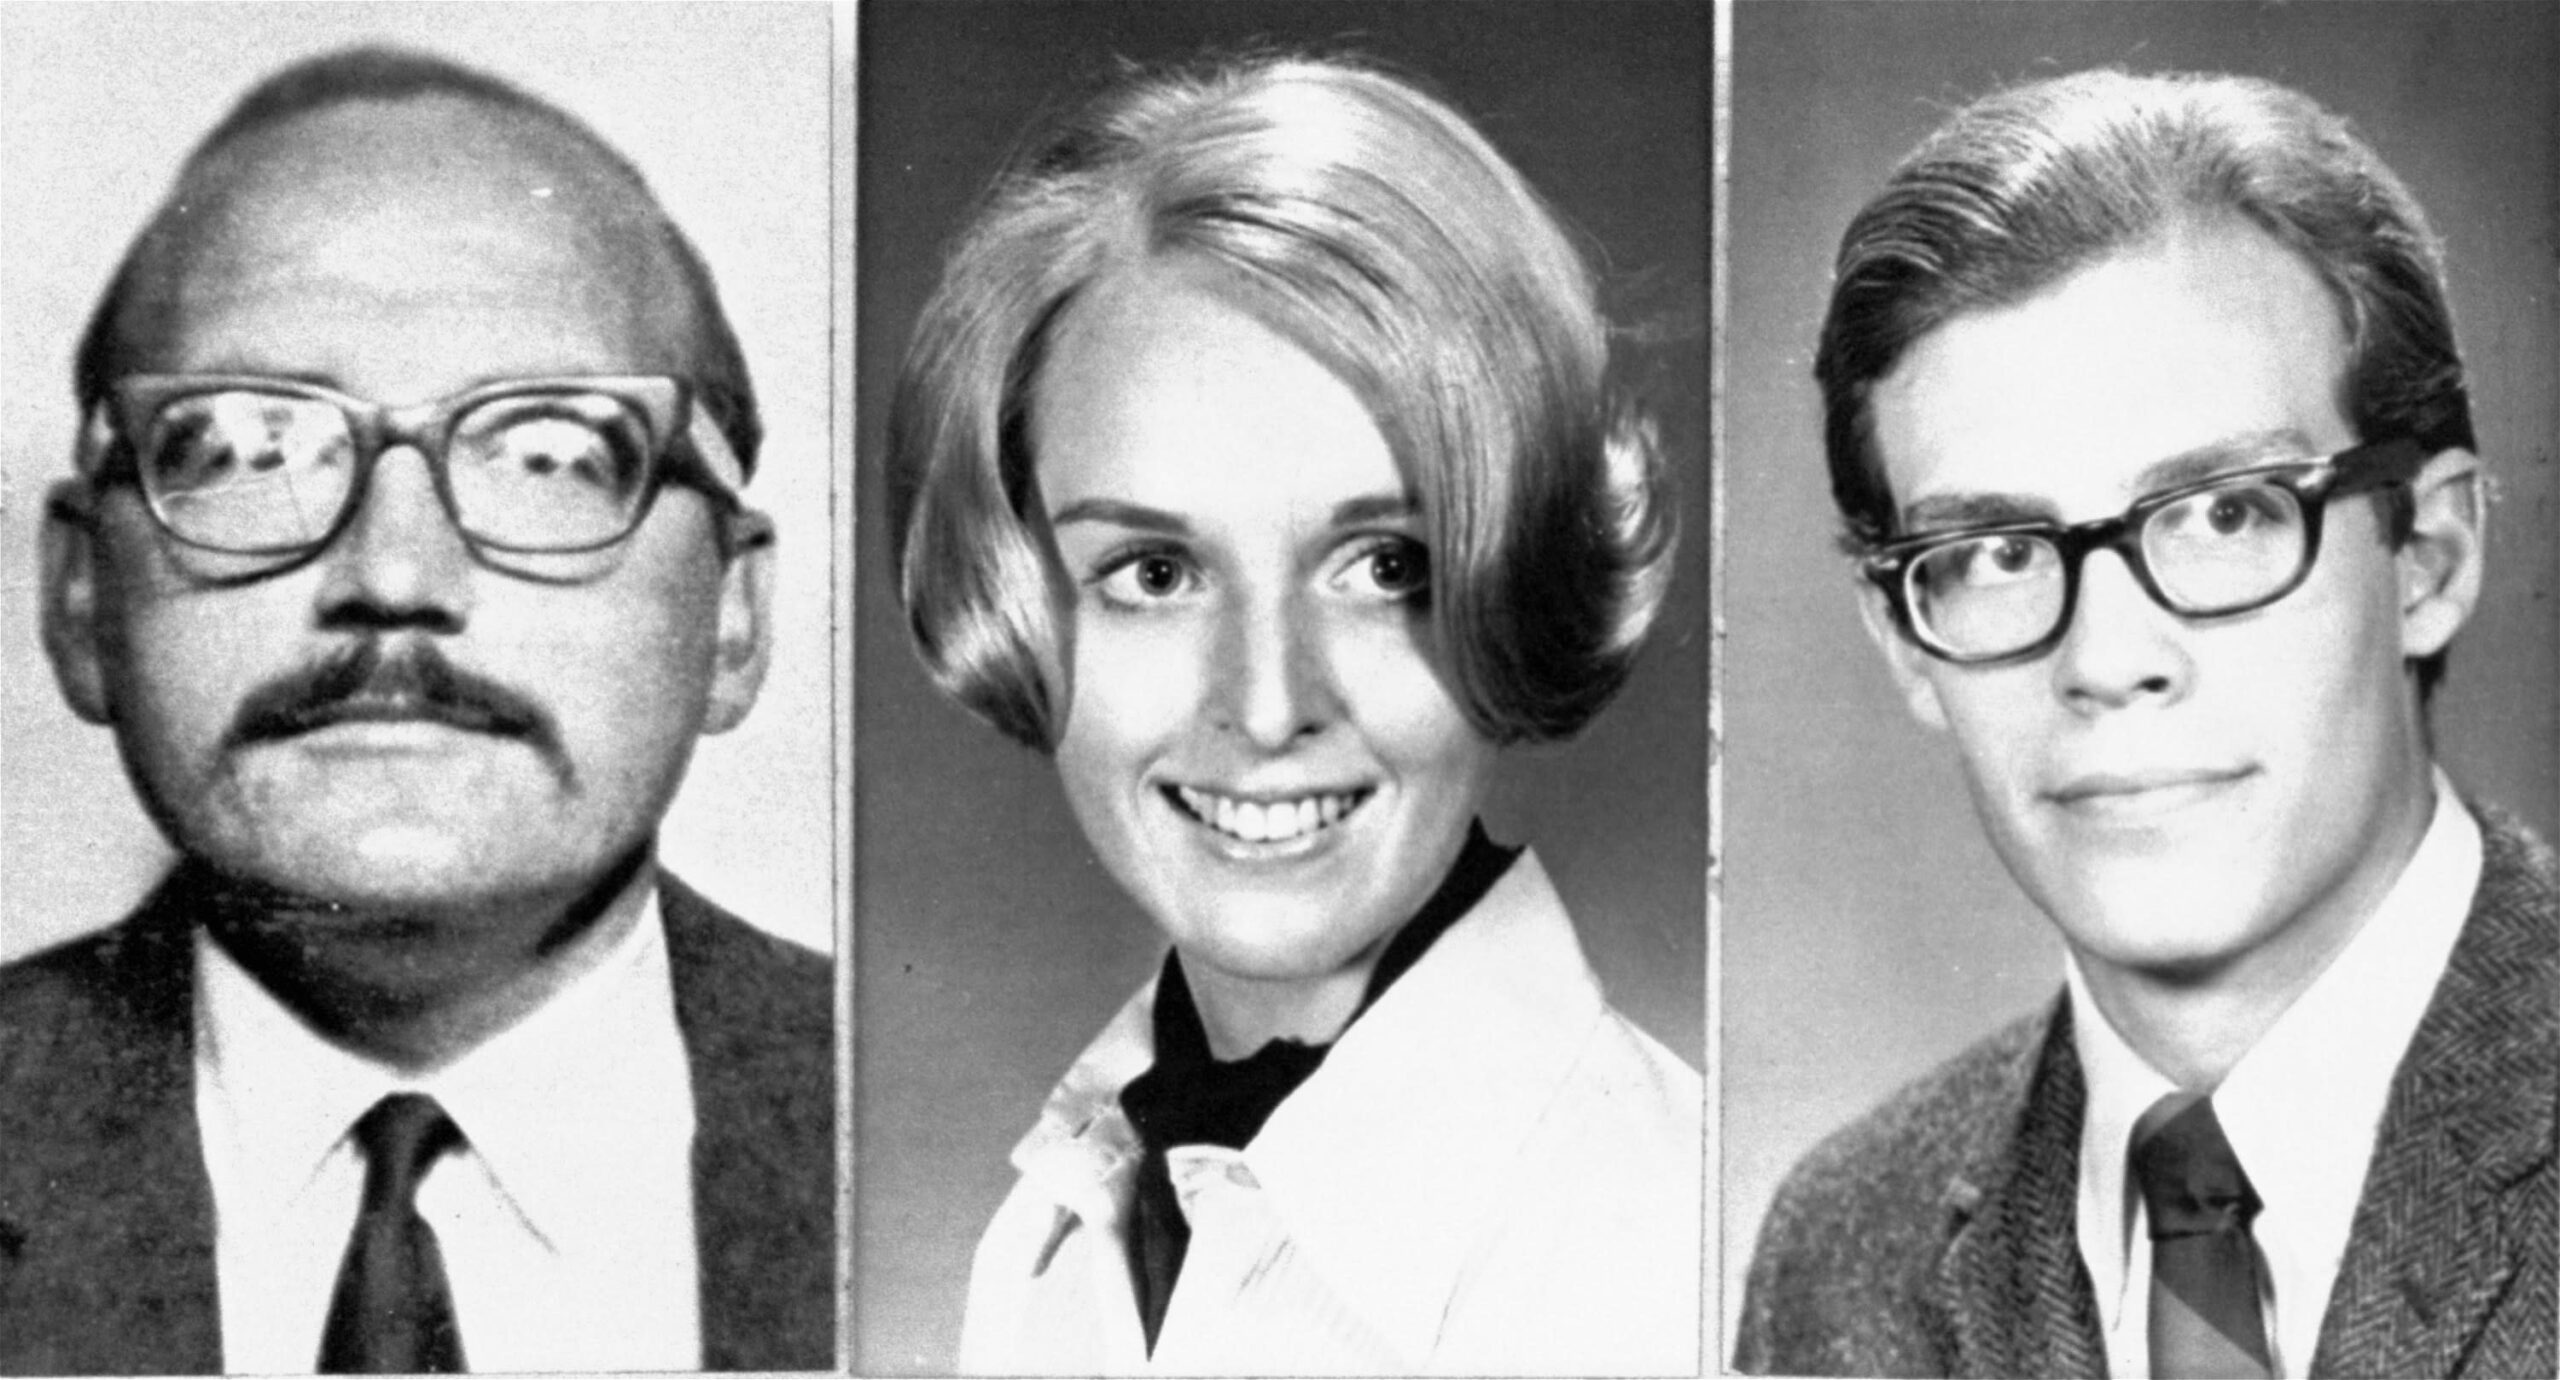 The Unsolved Case Of The Zodiac Killer: A Closer Look At The Prime Suspect